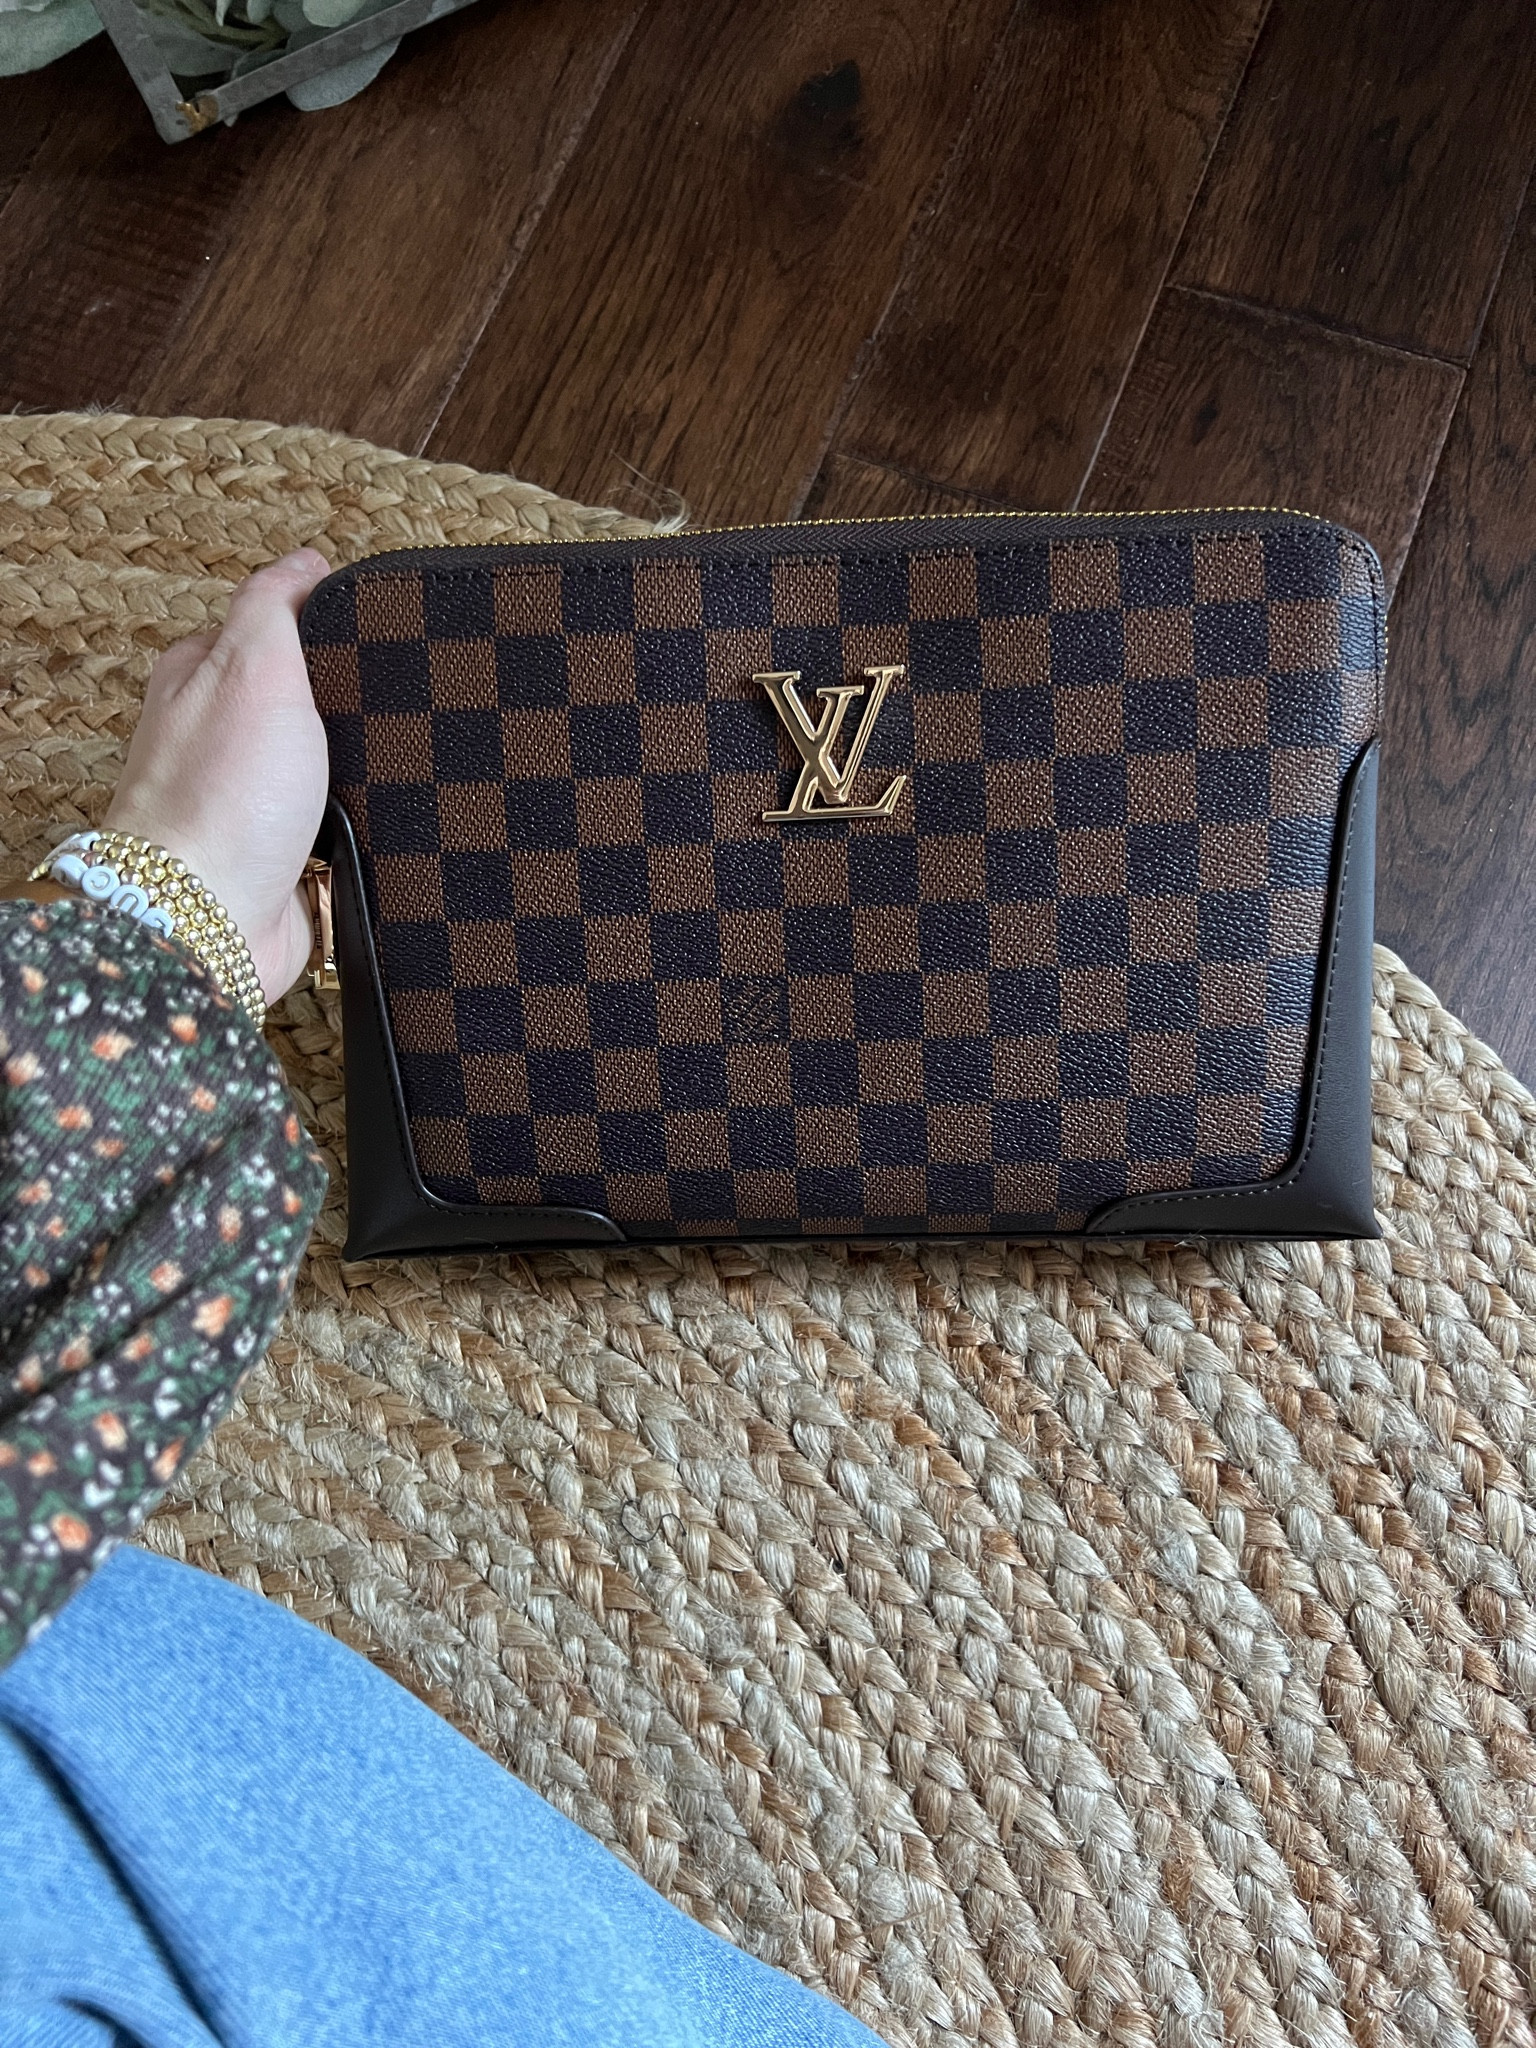 Top DHgate Sellers for Louis Vuitton - We Curate the best 2023 - Next Best  Alternative